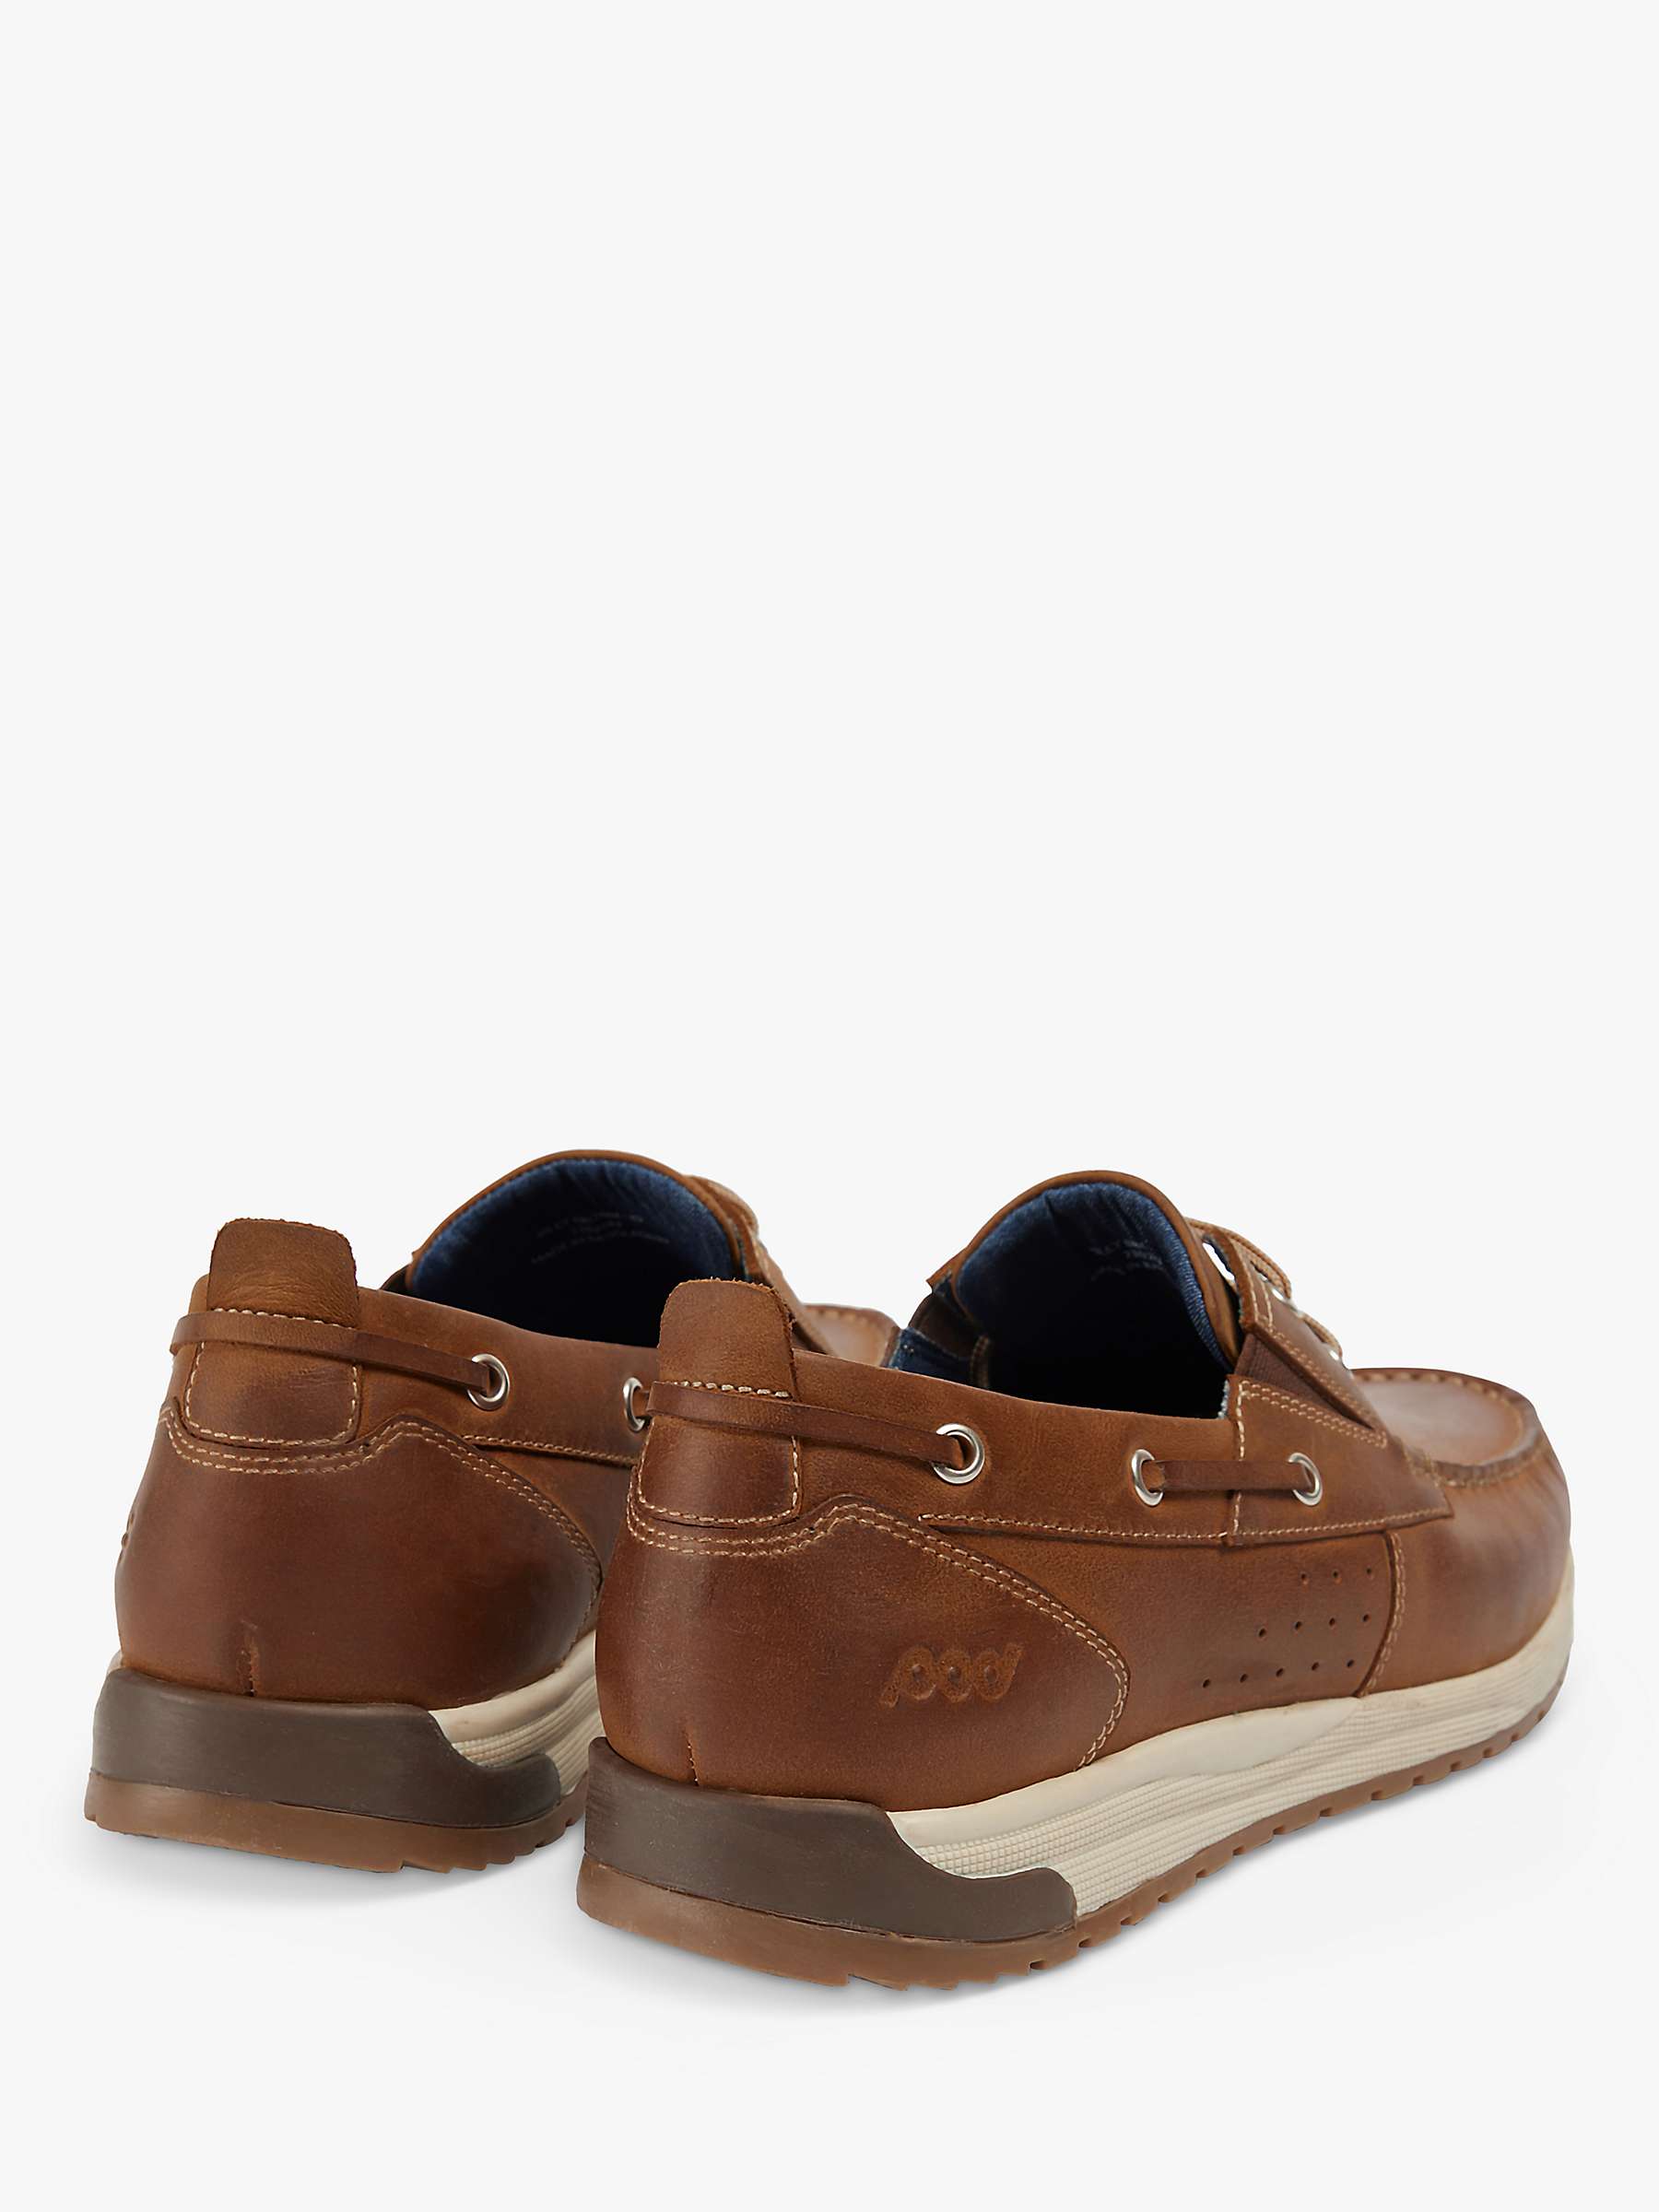 Buy Pod Riley Leather Boat Shoes Online at johnlewis.com